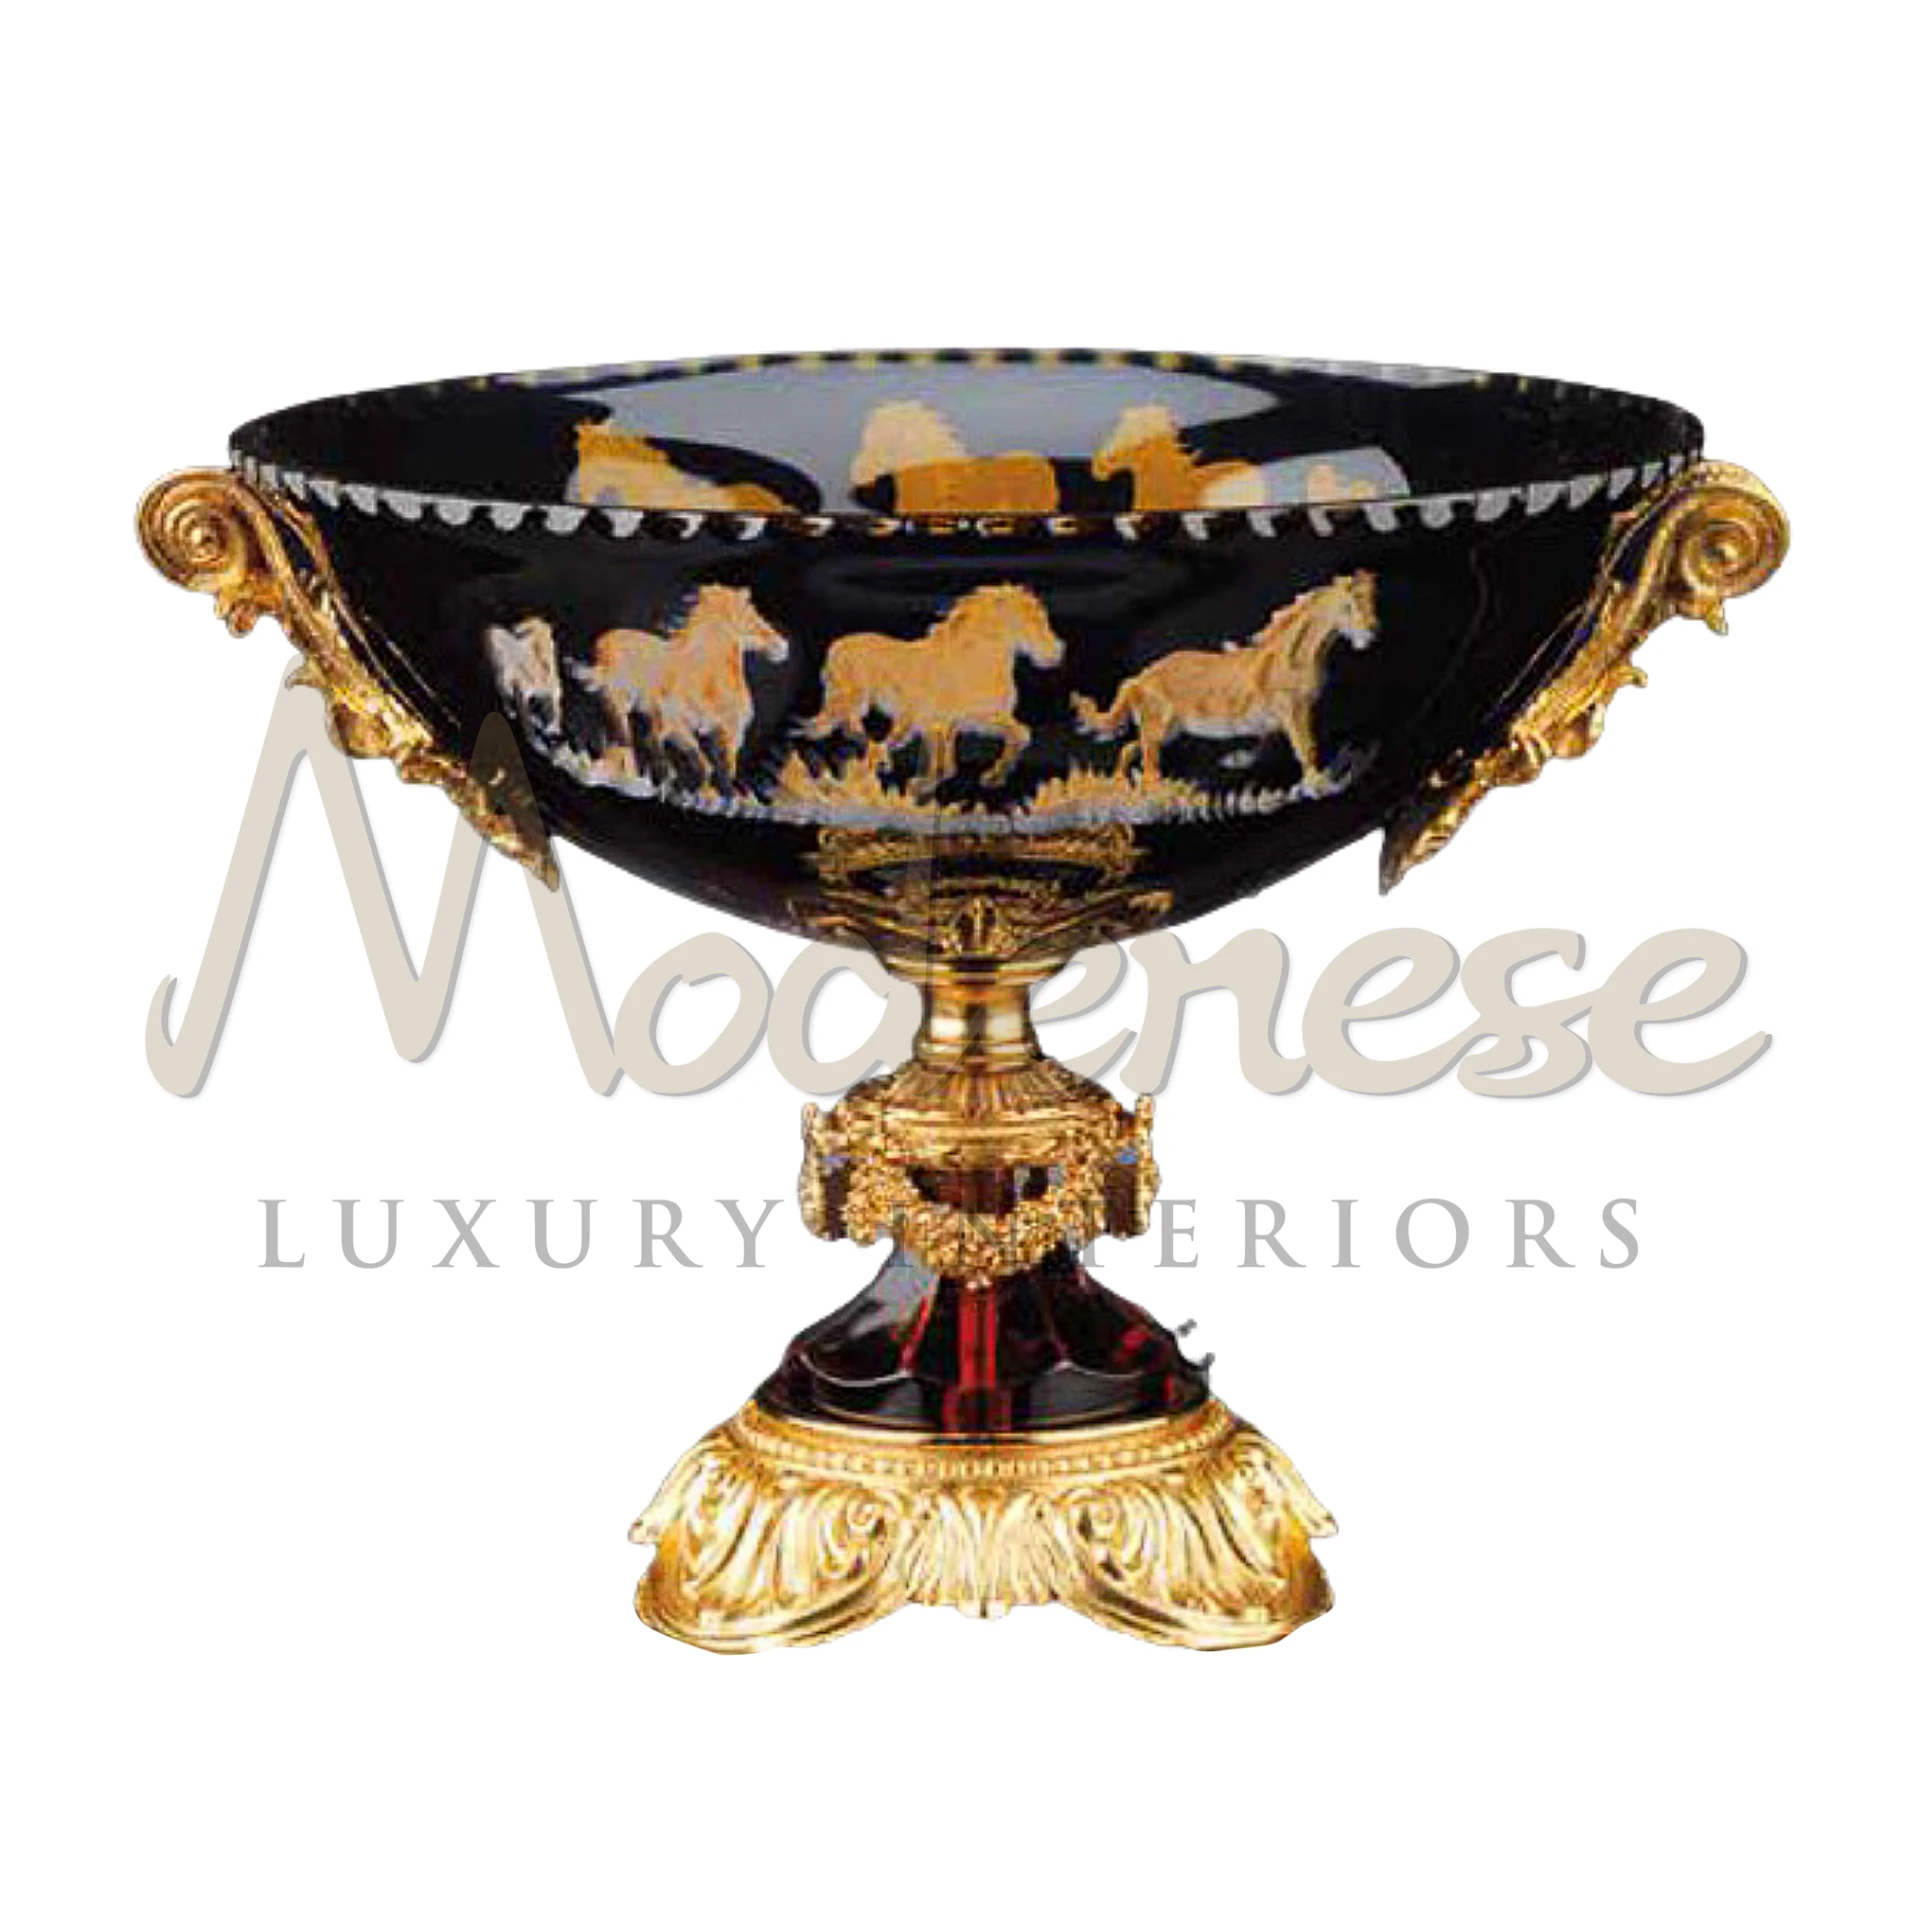 Luxury Dark Glass Bowl with horse ornamentation by Modenese, a statement piece that exudes sophistication and classic elegance.